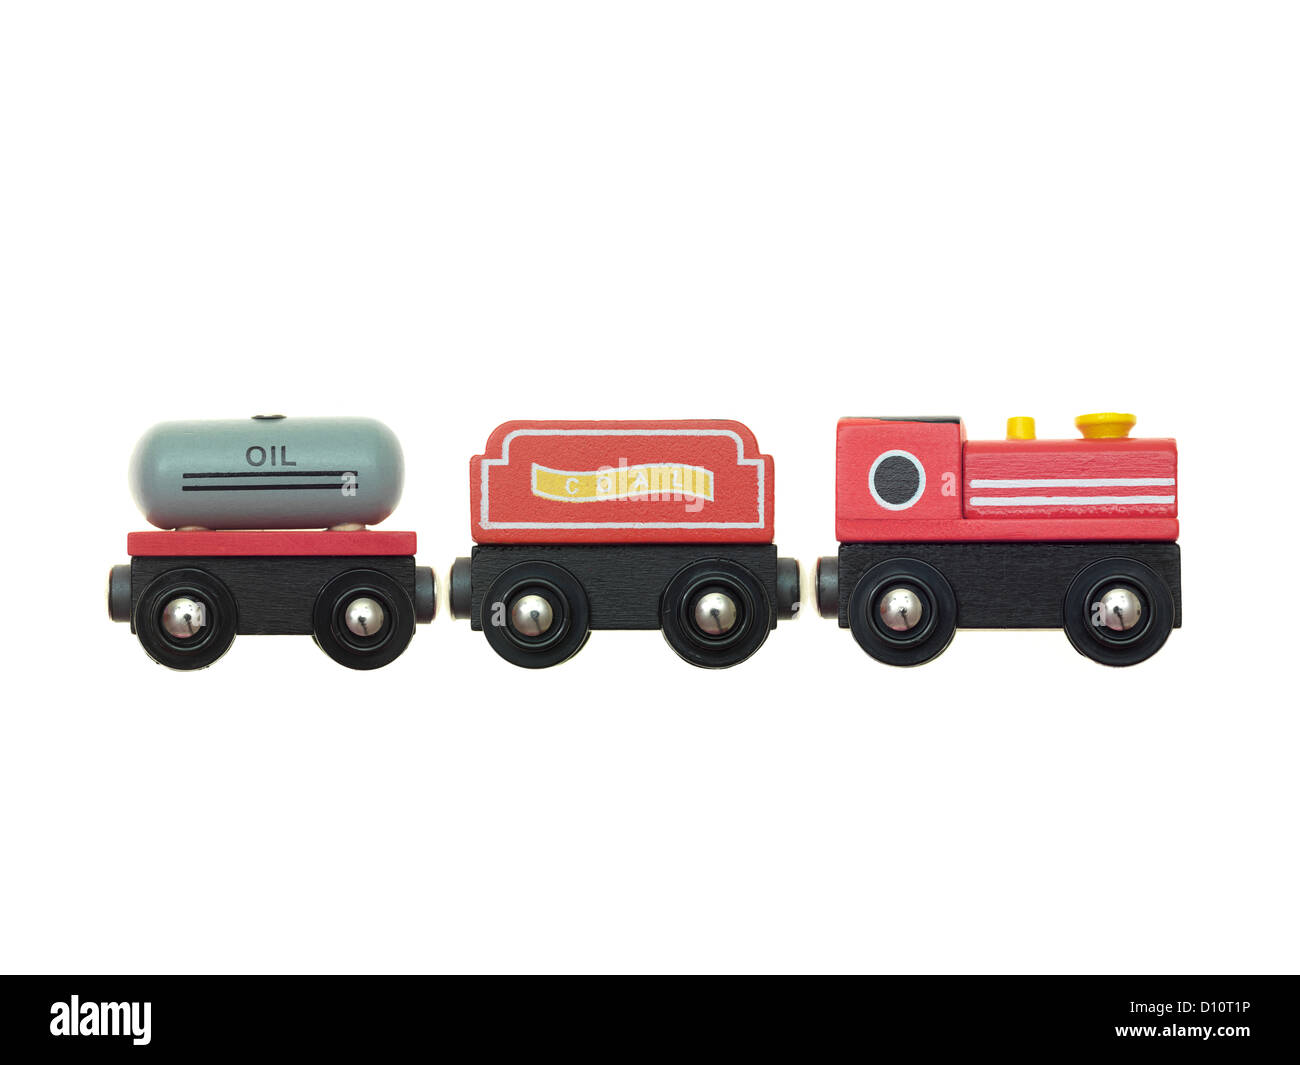 Model Train Cutout High Resolution Stock Photography and Images - Alamy